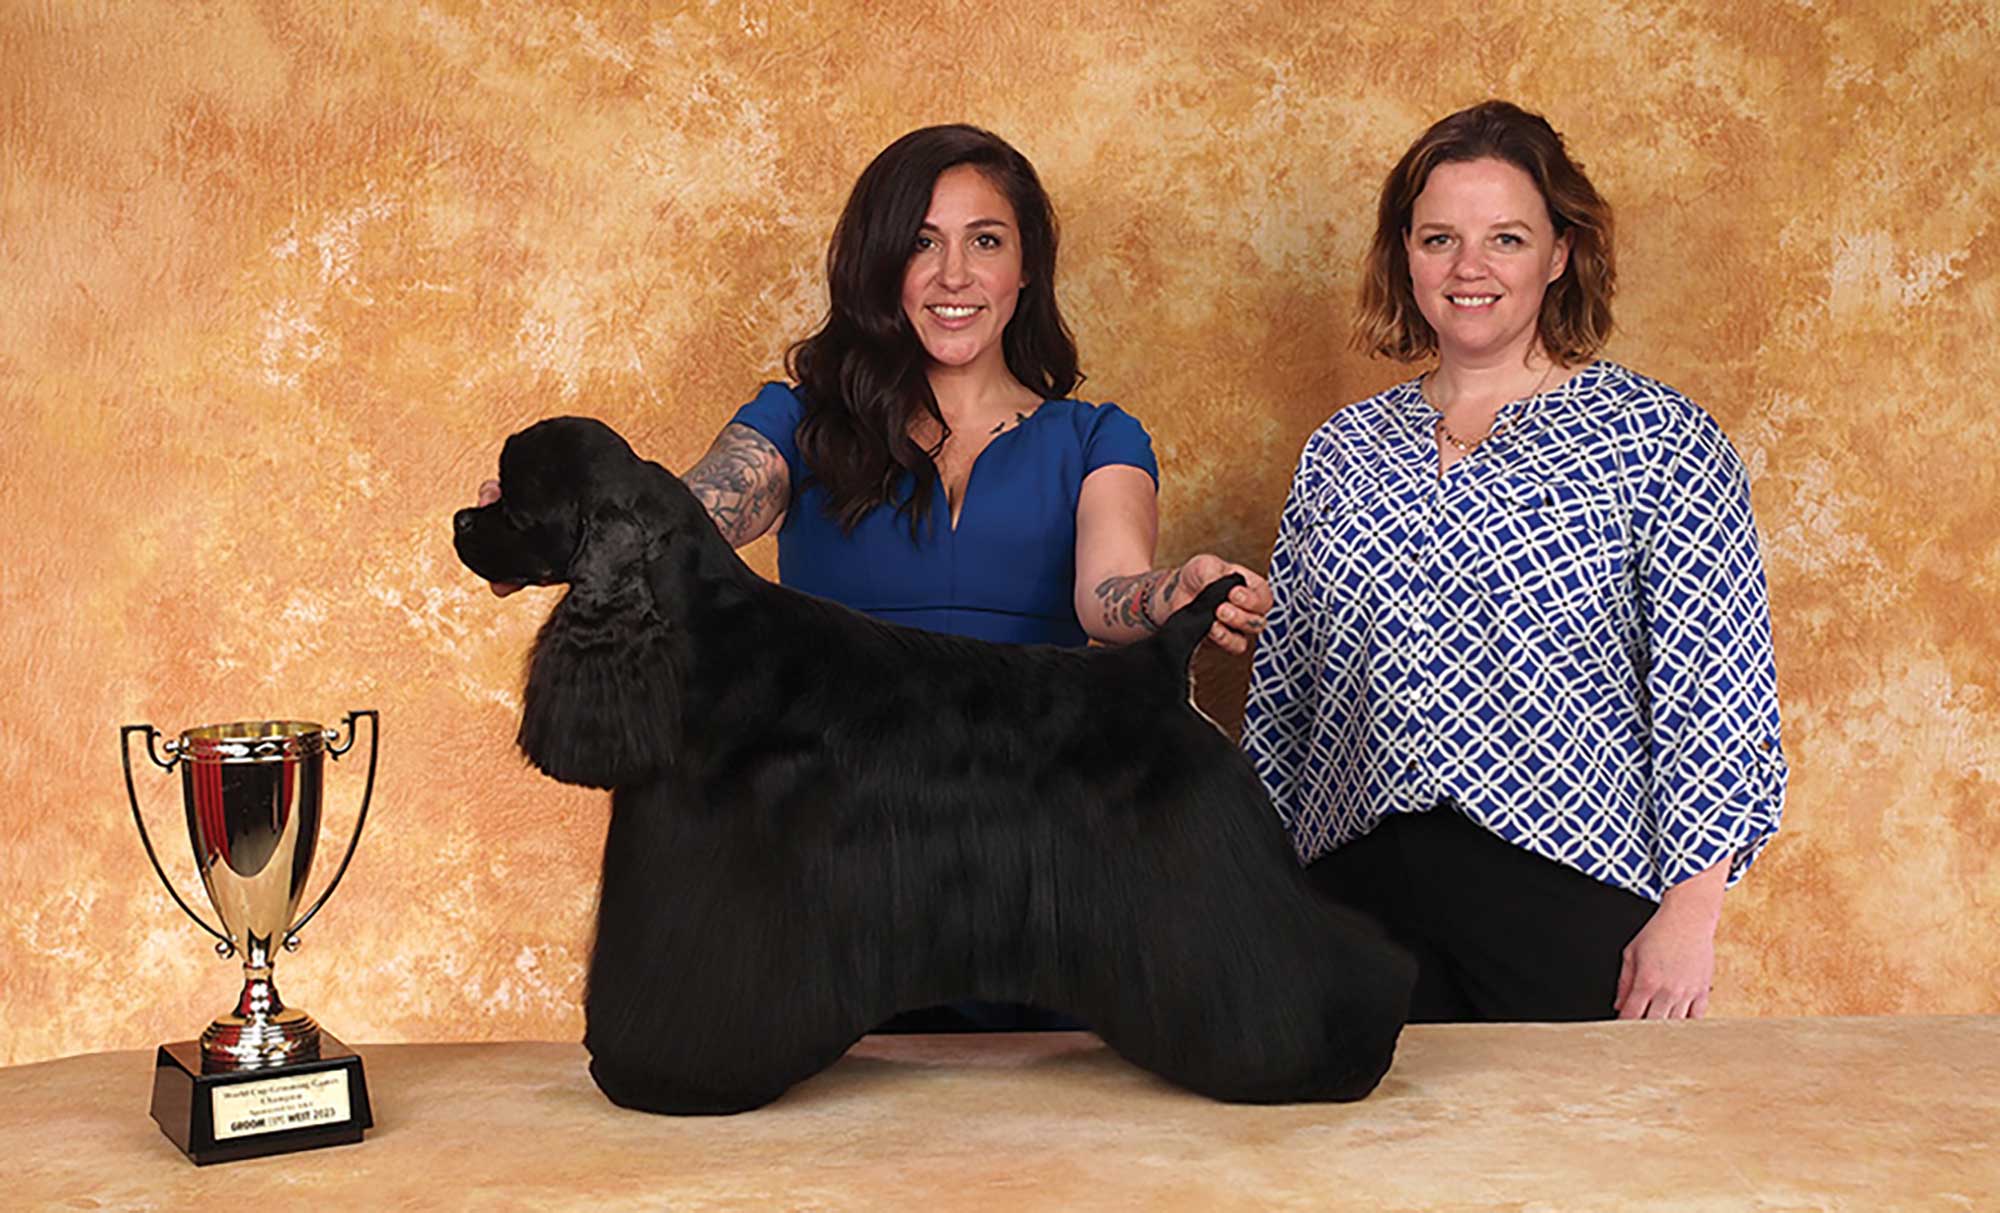 Mackensie Murphy with sponsor AKC and a black dog